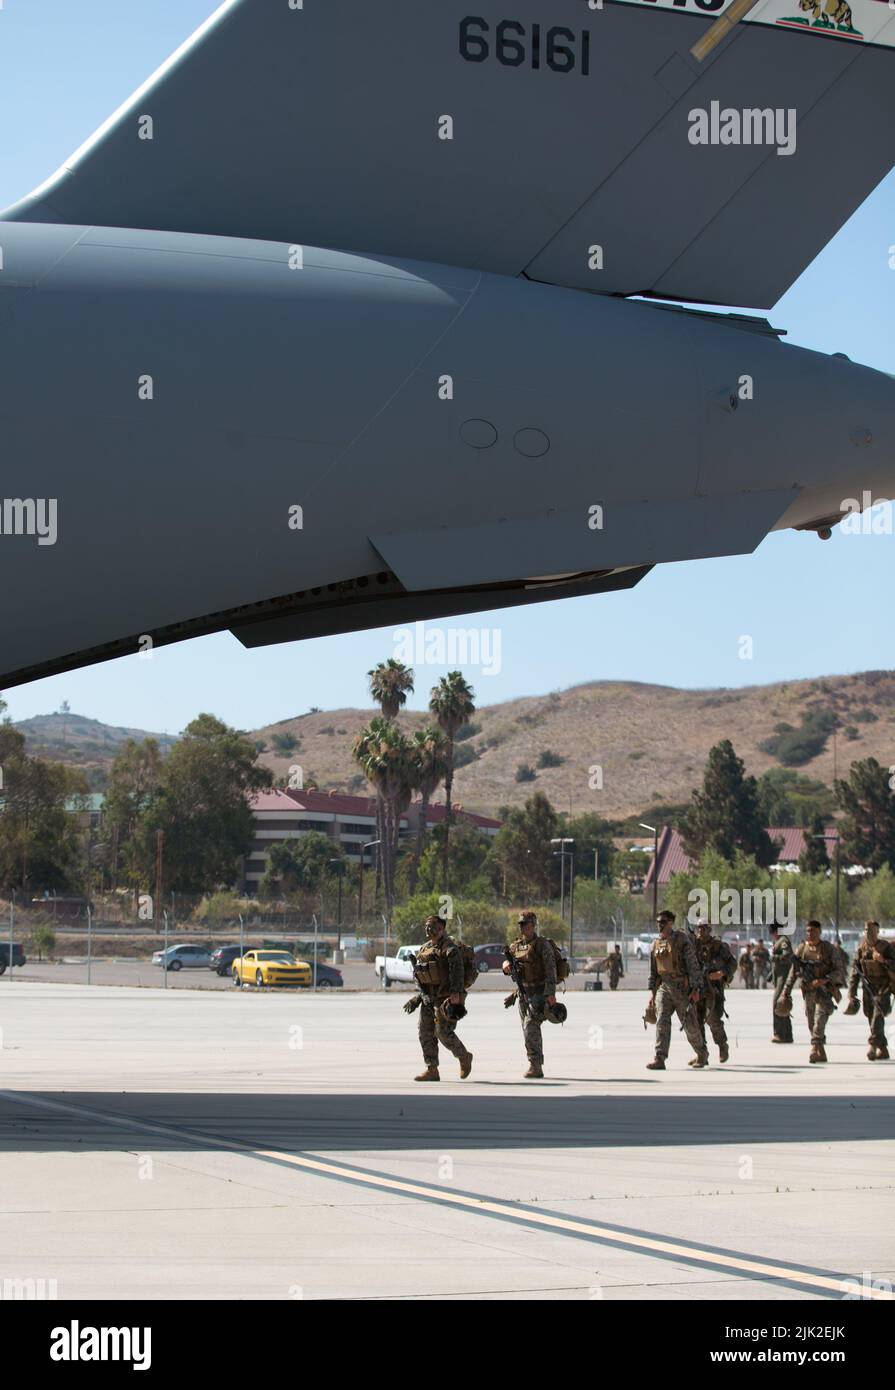 U.S. Marines with 3rd Battalion, 5th Marine Regiment, 1st Marine Division board a U.S. Air Force C-17 Globemaster III aircraft during a joint training exercise on Marine Corps Air Station Camp Pendleton, California, July 25, 2022. This exercise included aircraft from five different U.S. Air Force squadrons and Marines with 3/5, 1st MarDiv to enhance their expeditionary operations in a joint-training environment. This was the first time MCAS Camp Pendleton staged five C-17 Globemaster III aircraft on the air station at one time. (U.S. Marine Corps photo by Cpl. Shaina Jupiter) Stock Photo